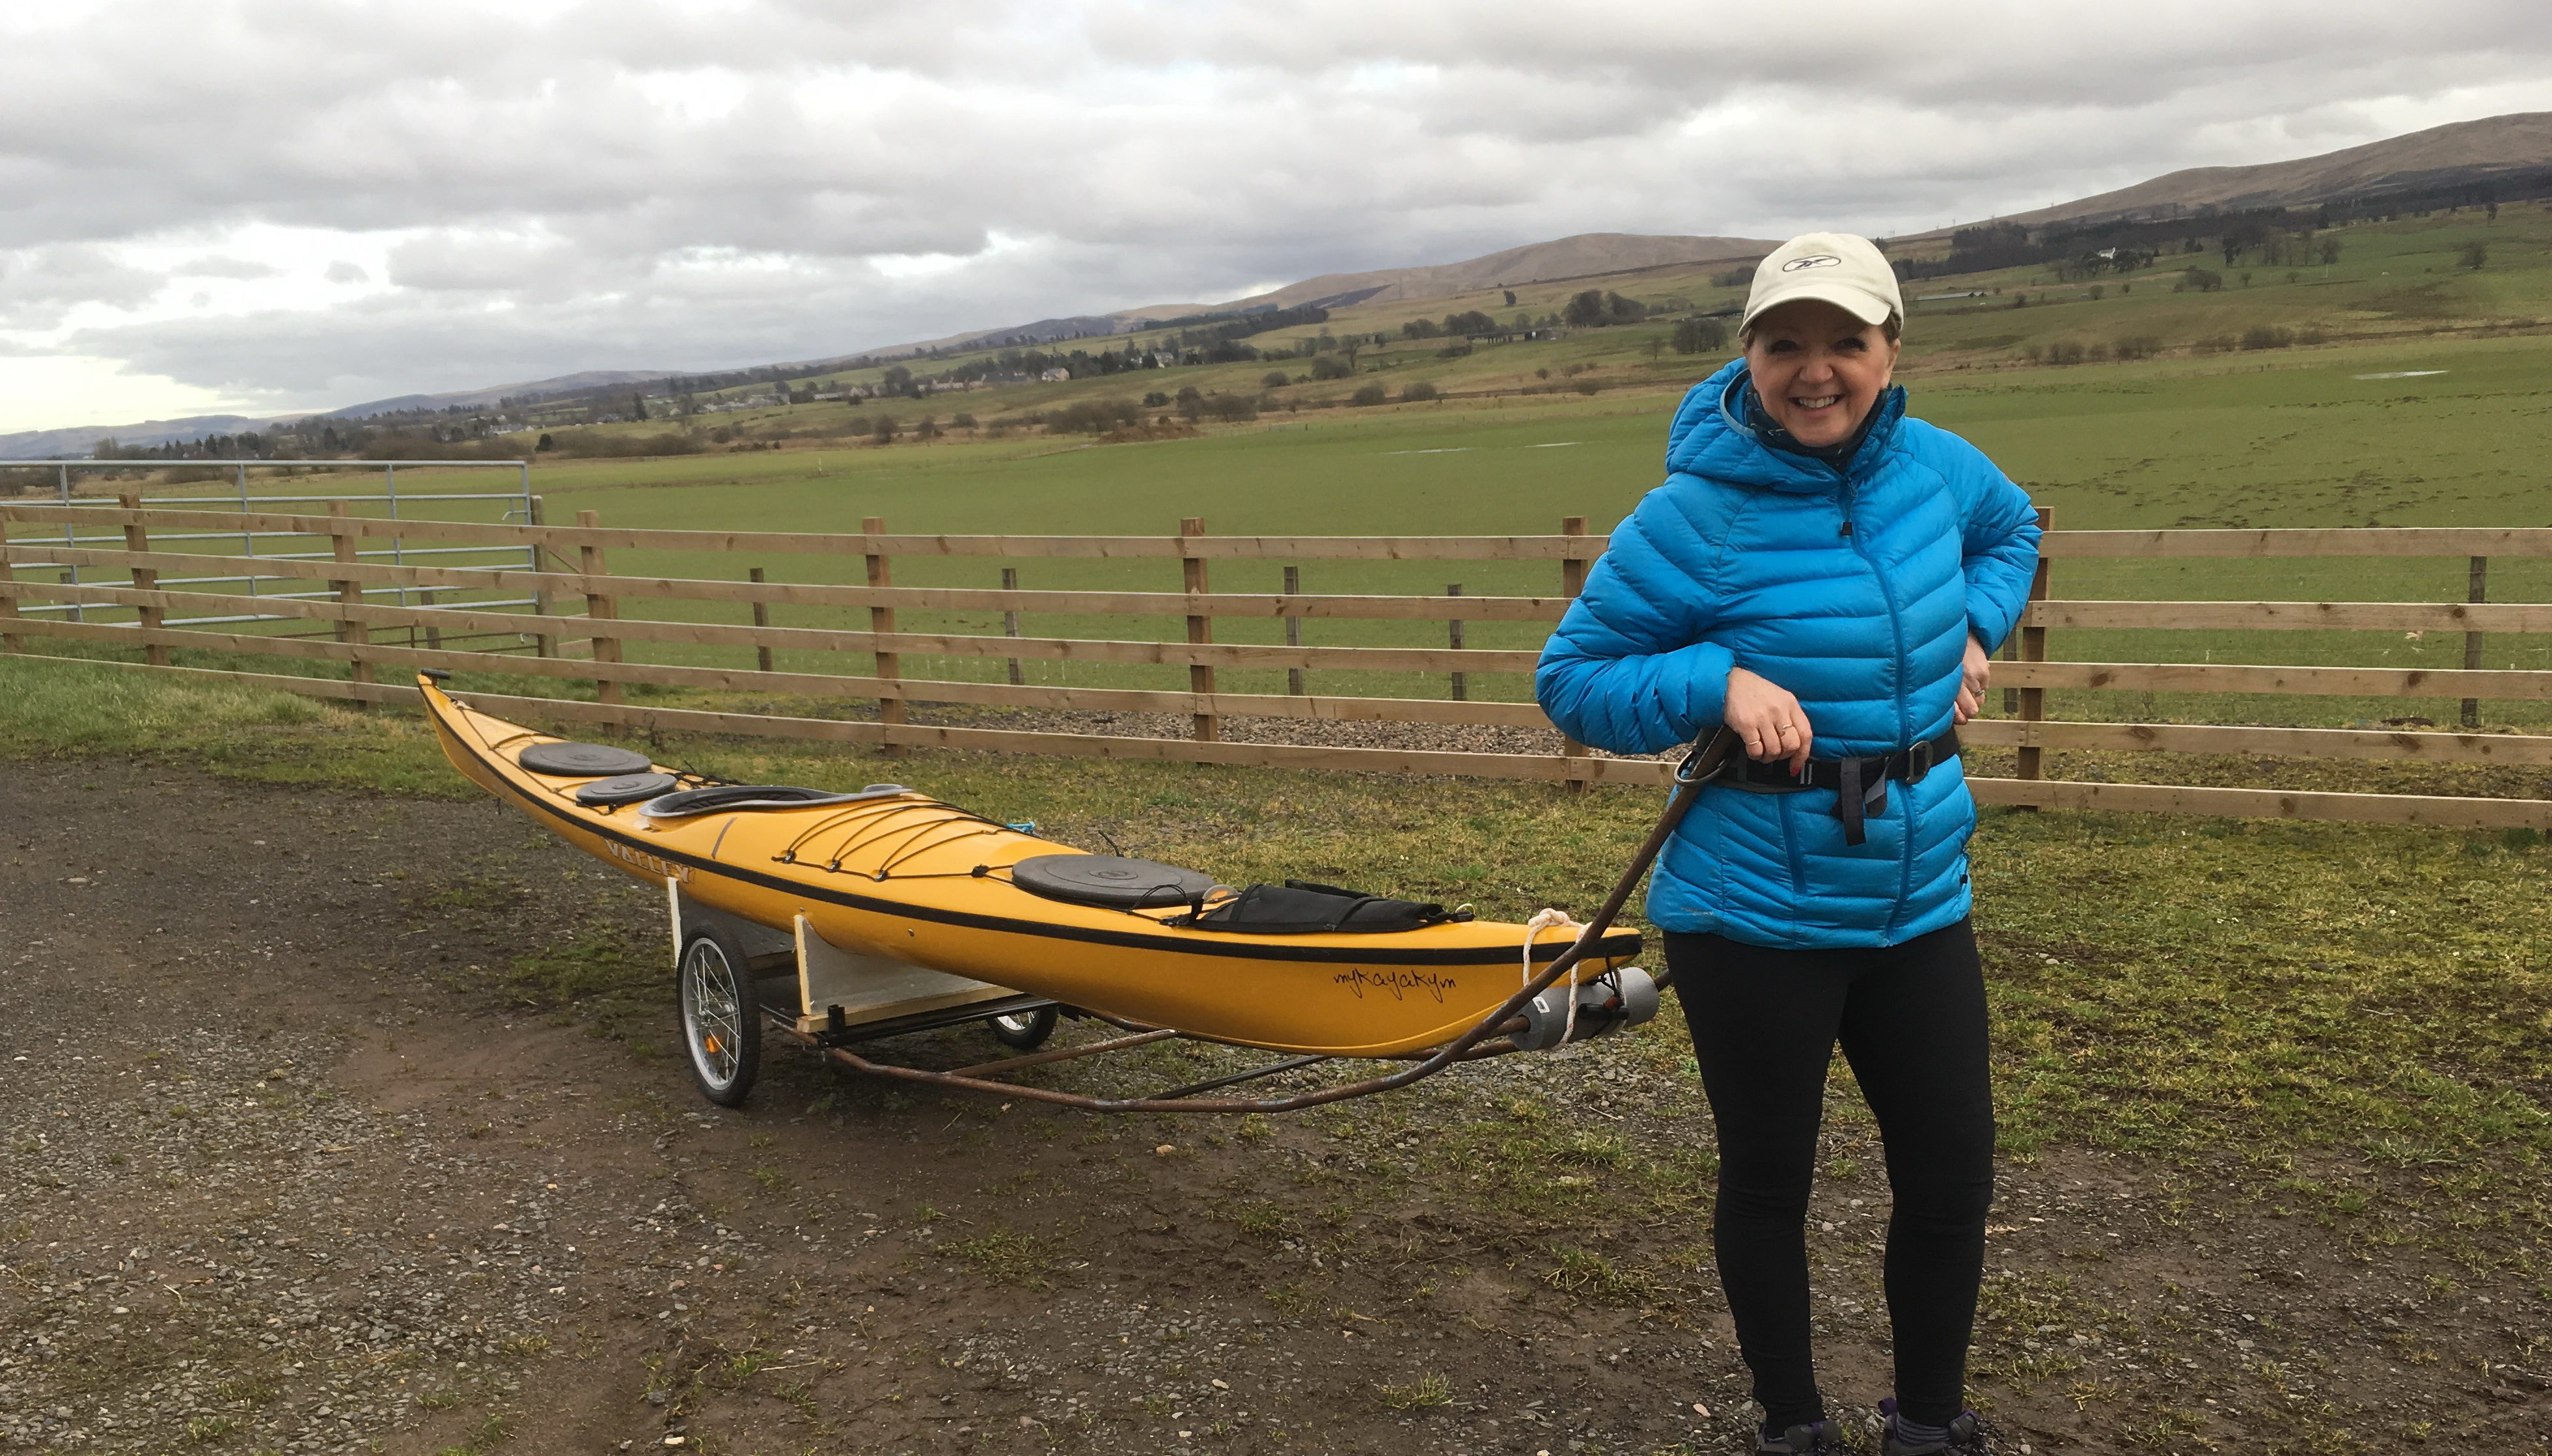 Alexis with her sea kayak